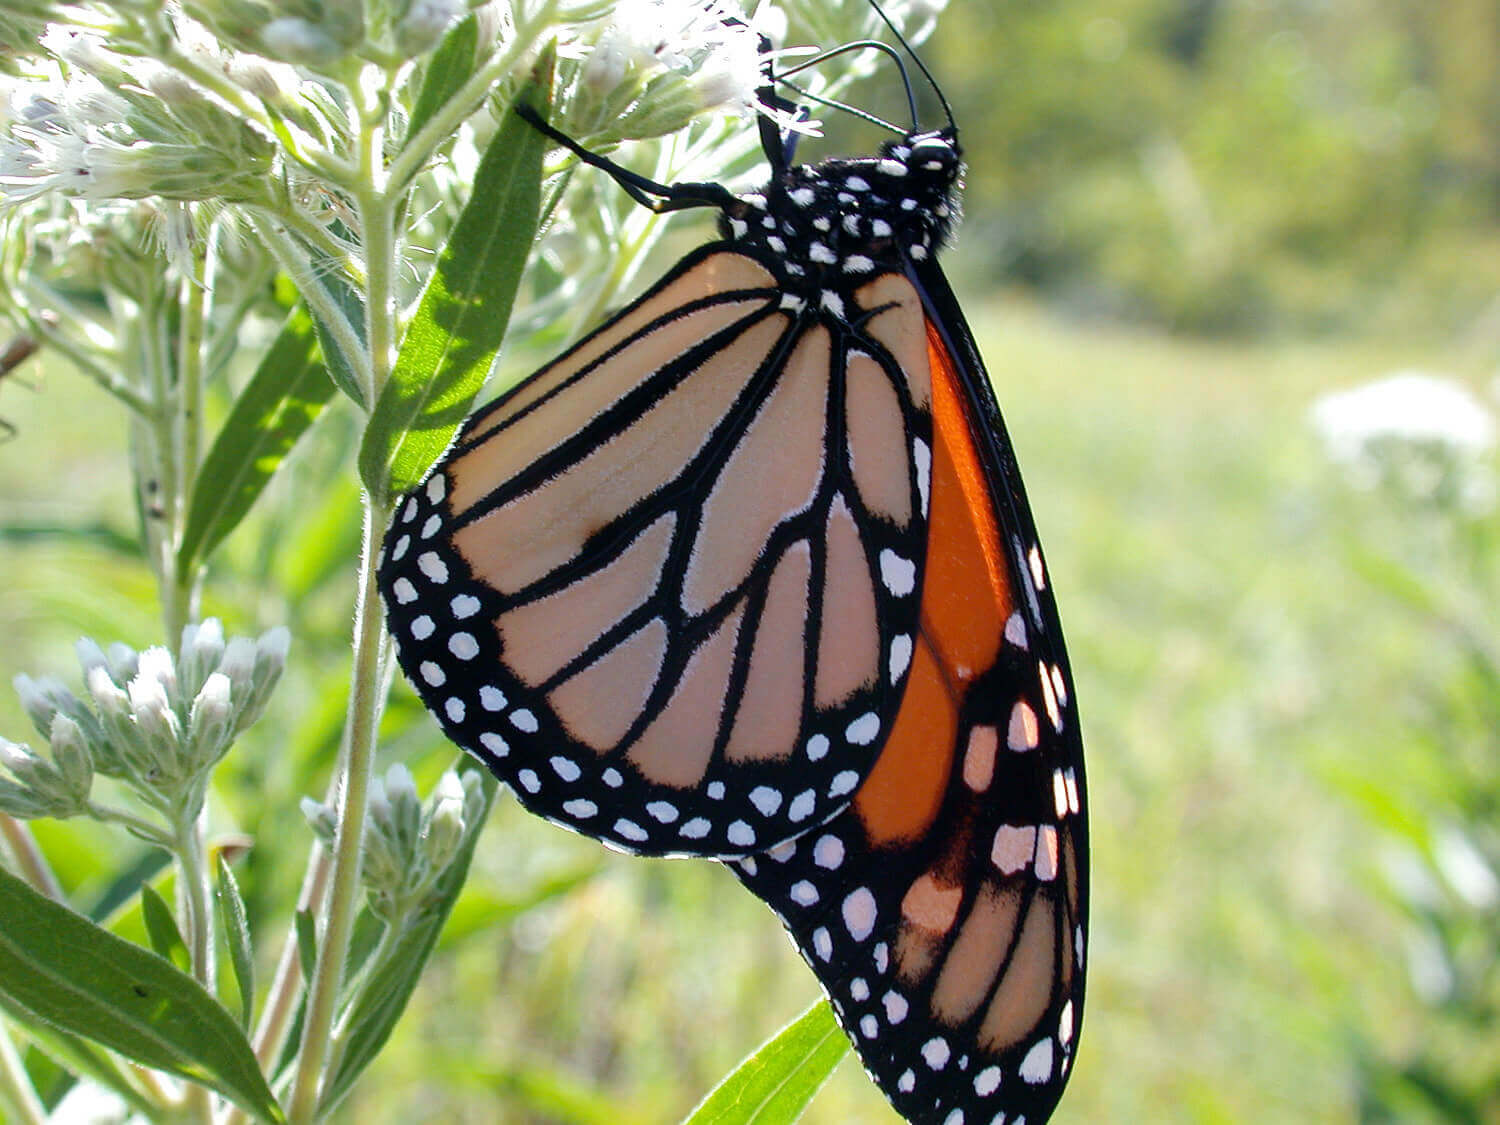 Purdue University researchers have found evidence near agricultural fields of pesticides on milkweed, a vital source of food for monarch butterfly caterpillars. It raises questions about pesticide roles in the decline of the species. (Photos by John Obermeyer/Purdue Entomology)